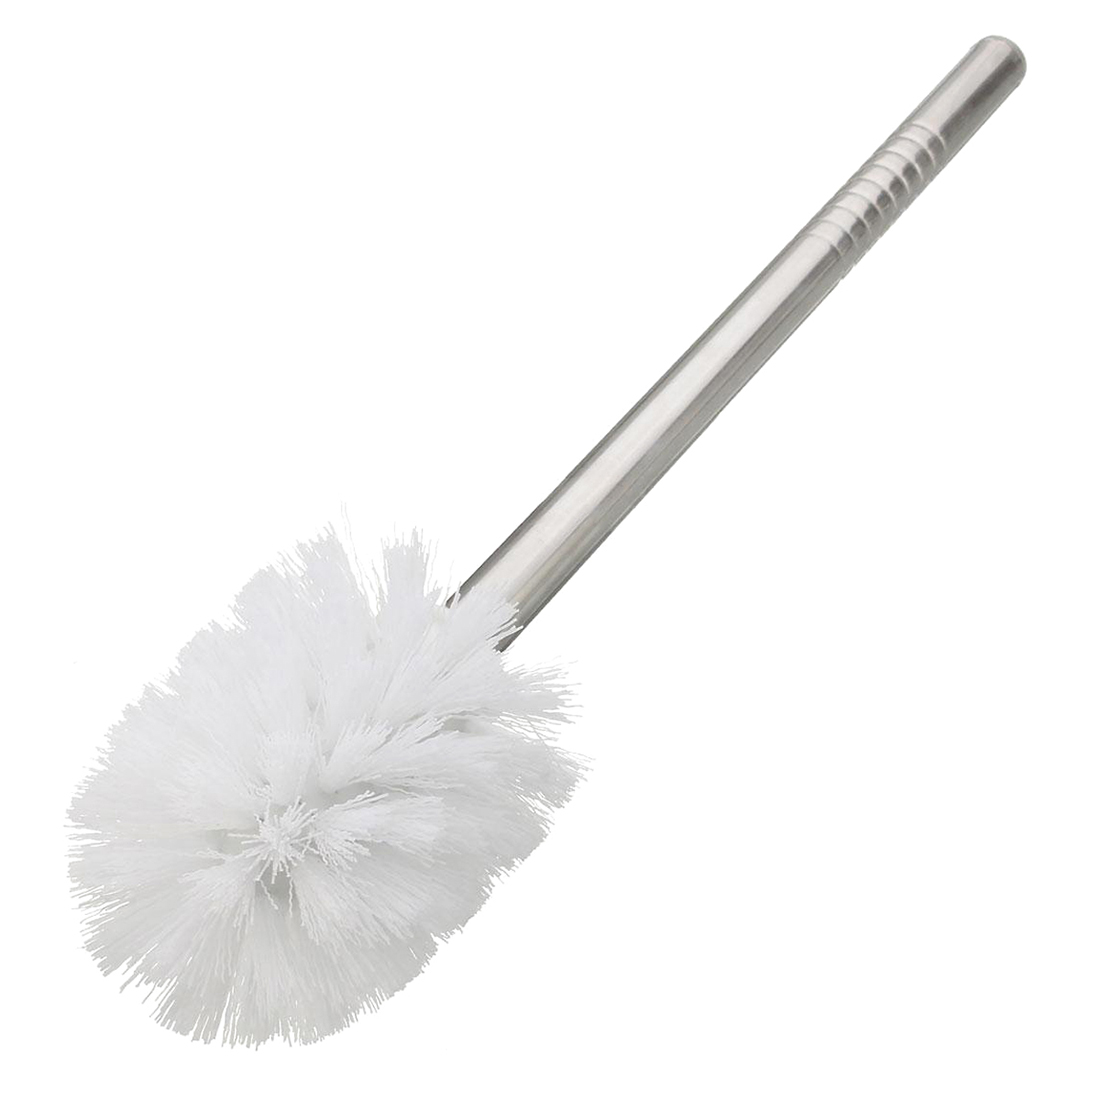 CNIM Hot Chrome Round Wall Mounted Toilet Brush and Frosted Glass Toilet Brush Holder